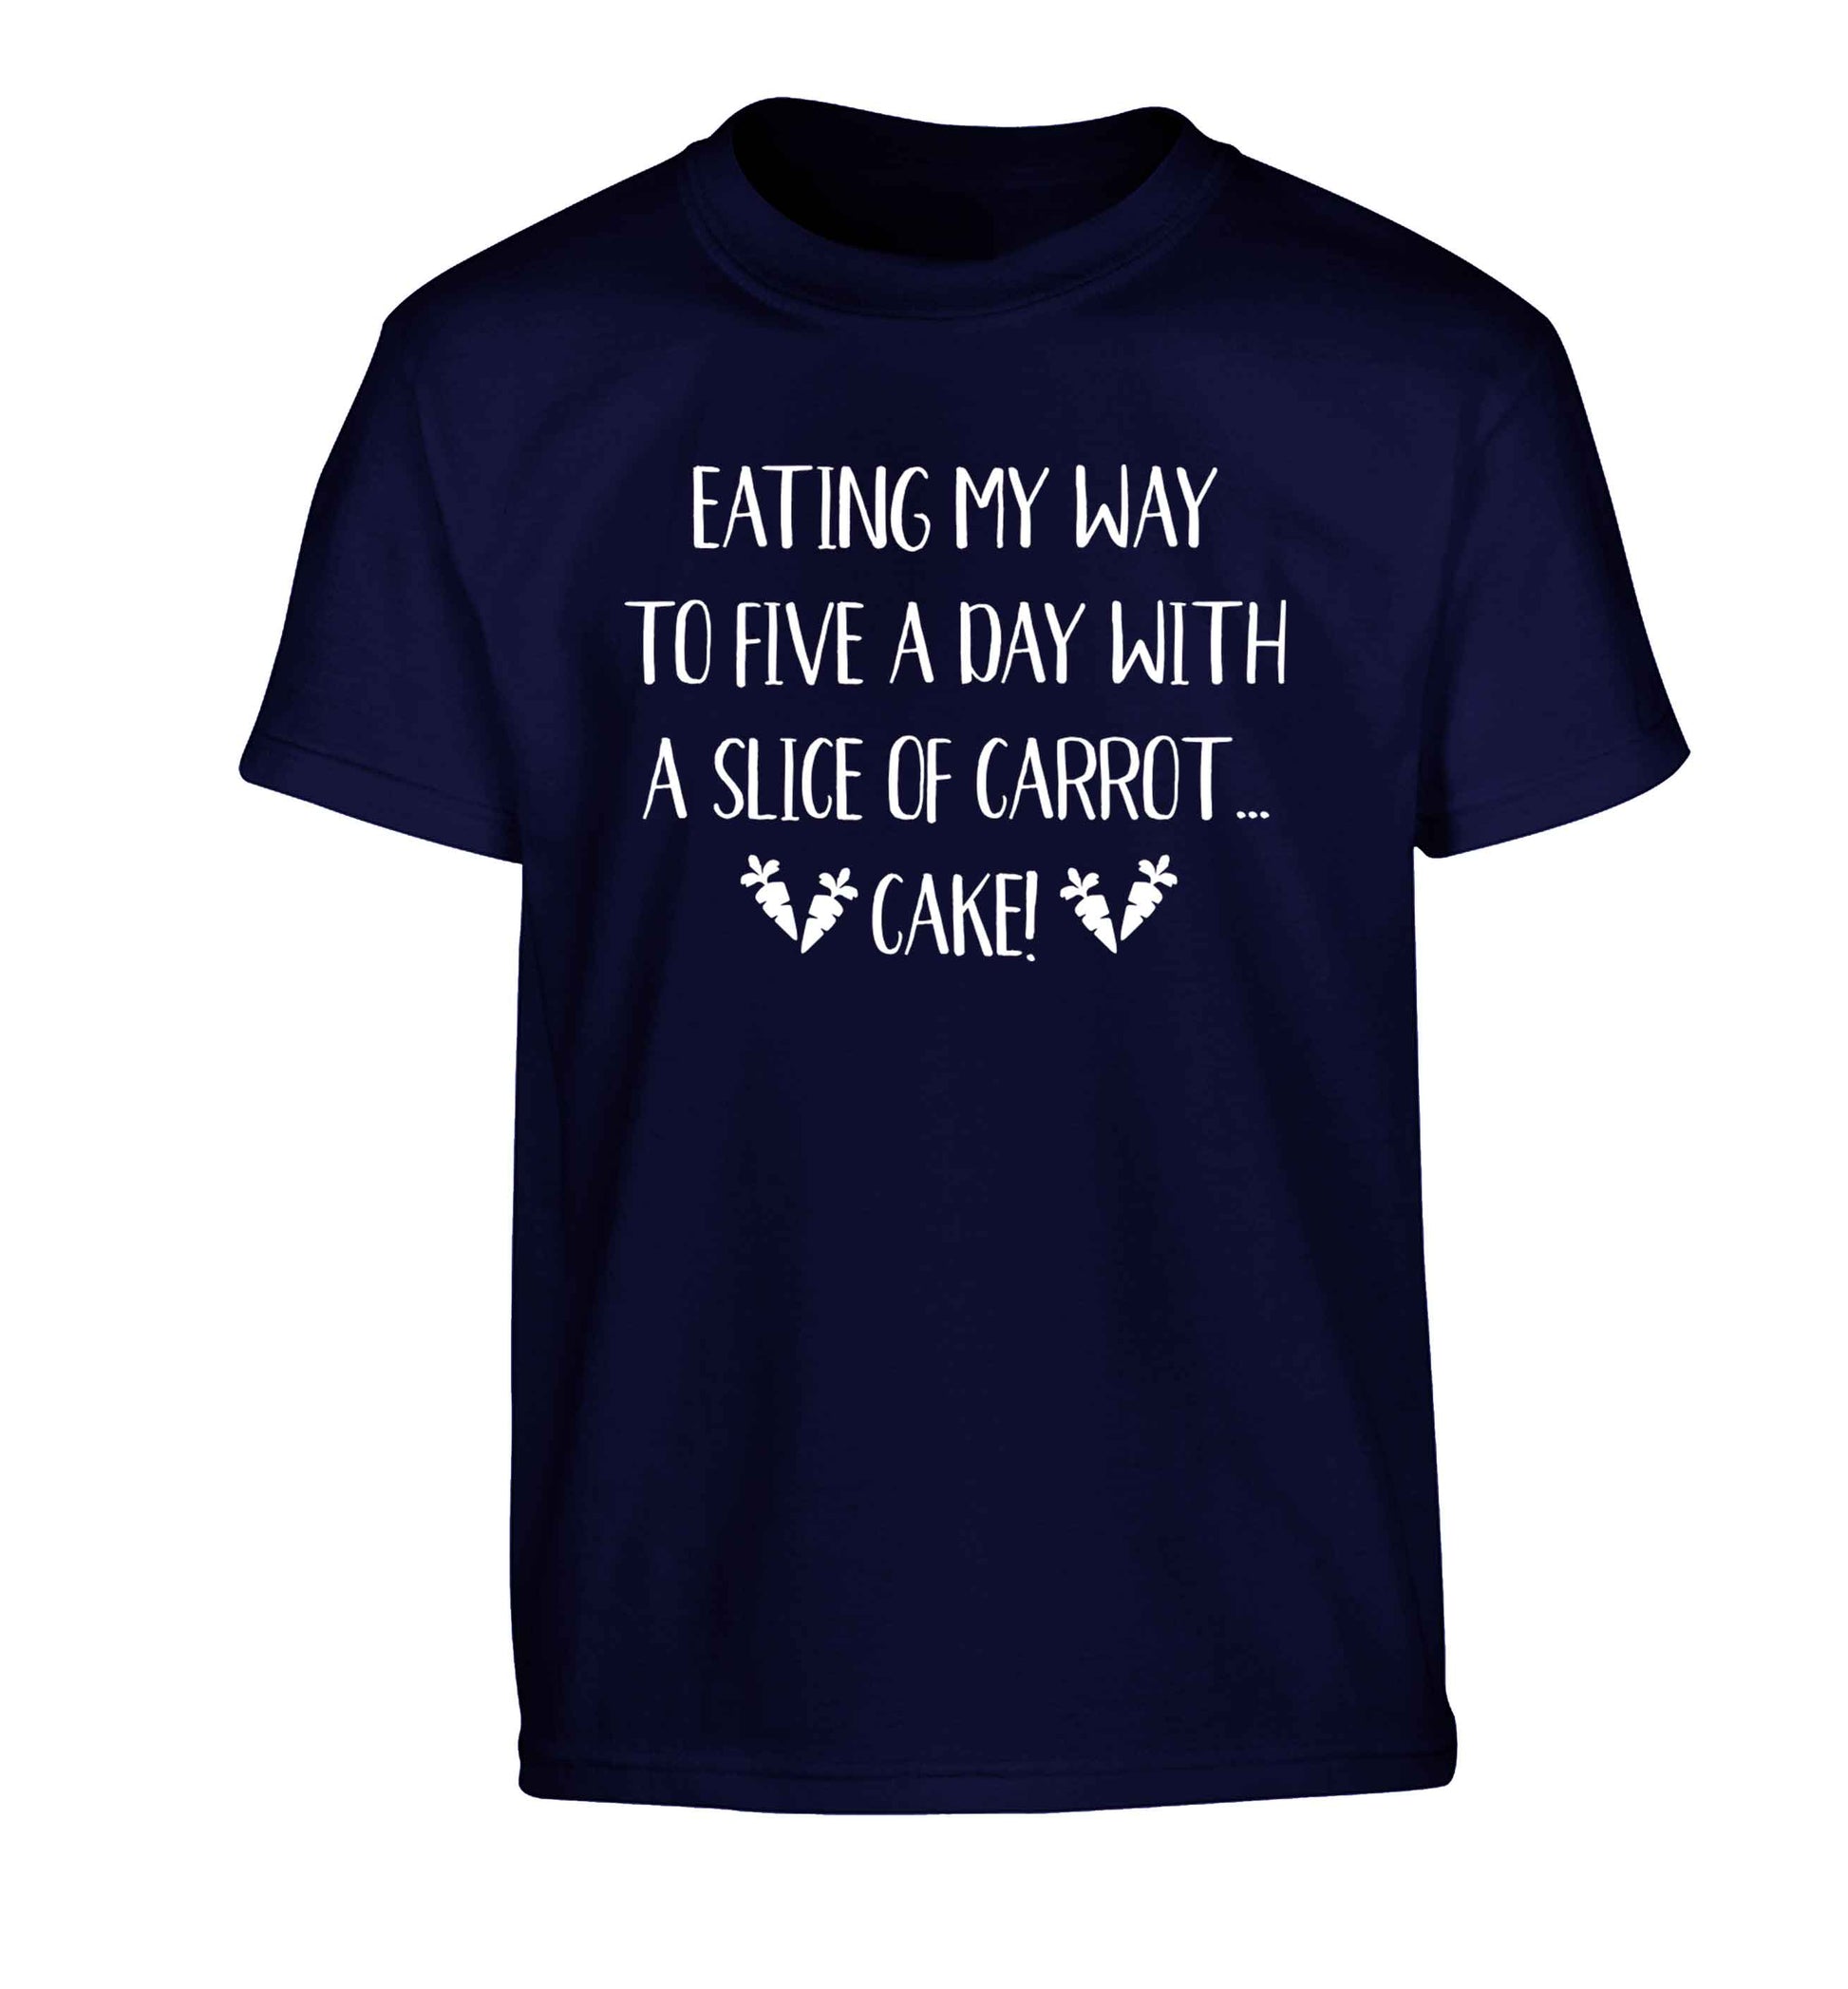 Eating my way to five a day with a slice of carrot cake day Children's navy Tshirt 12-13 Years